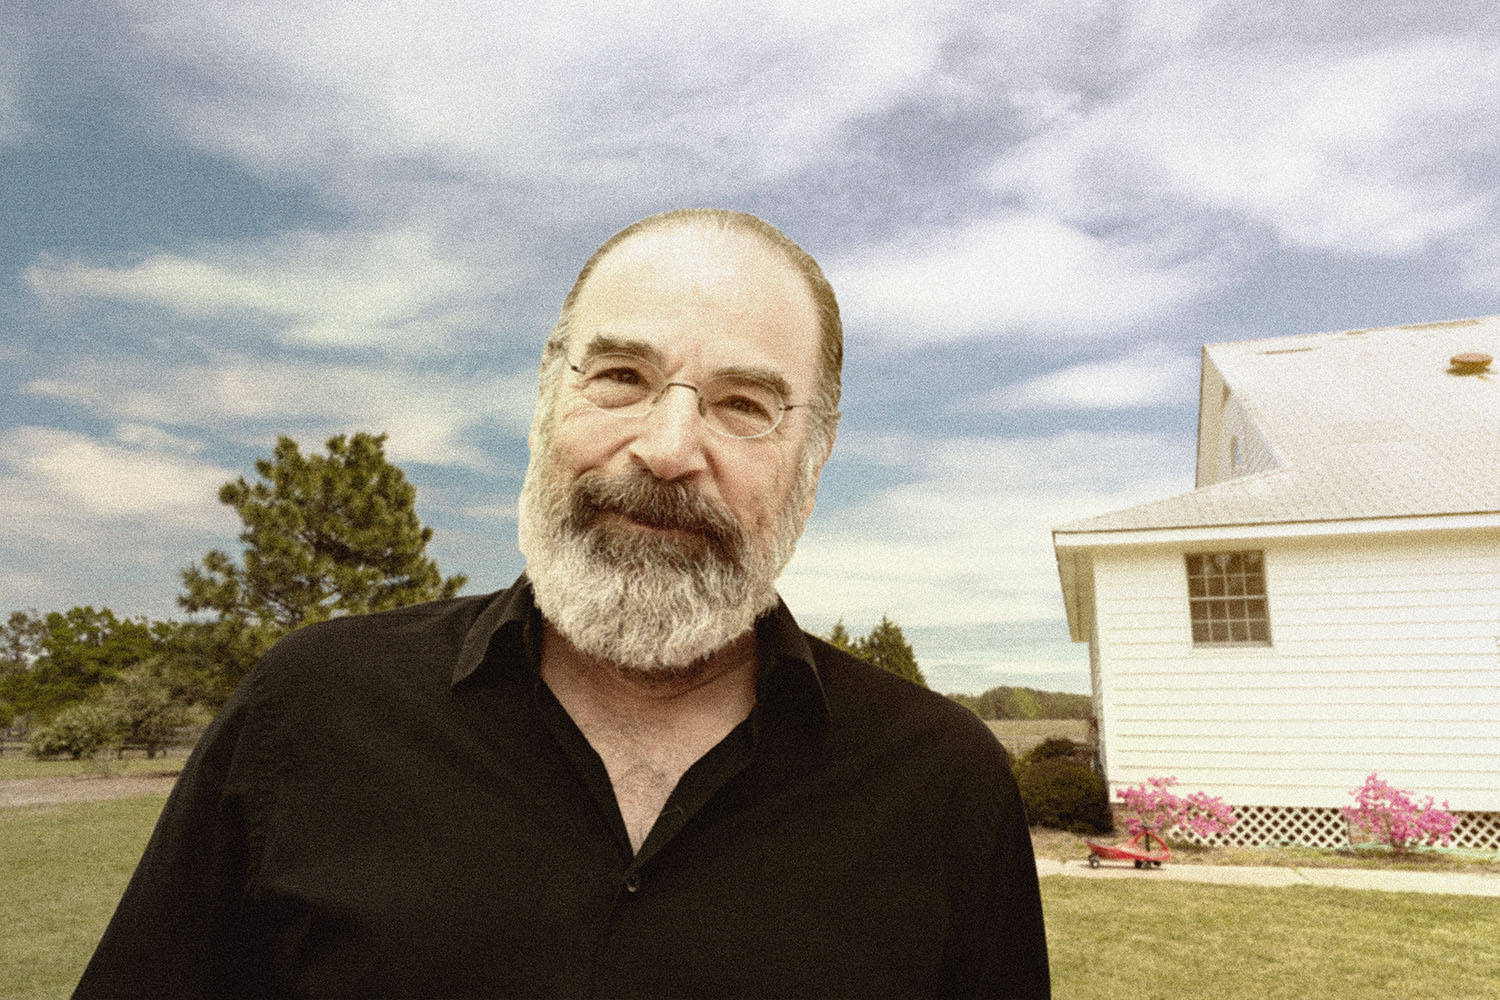 Mandy Patinkin Is All of Our Dads on Social Media